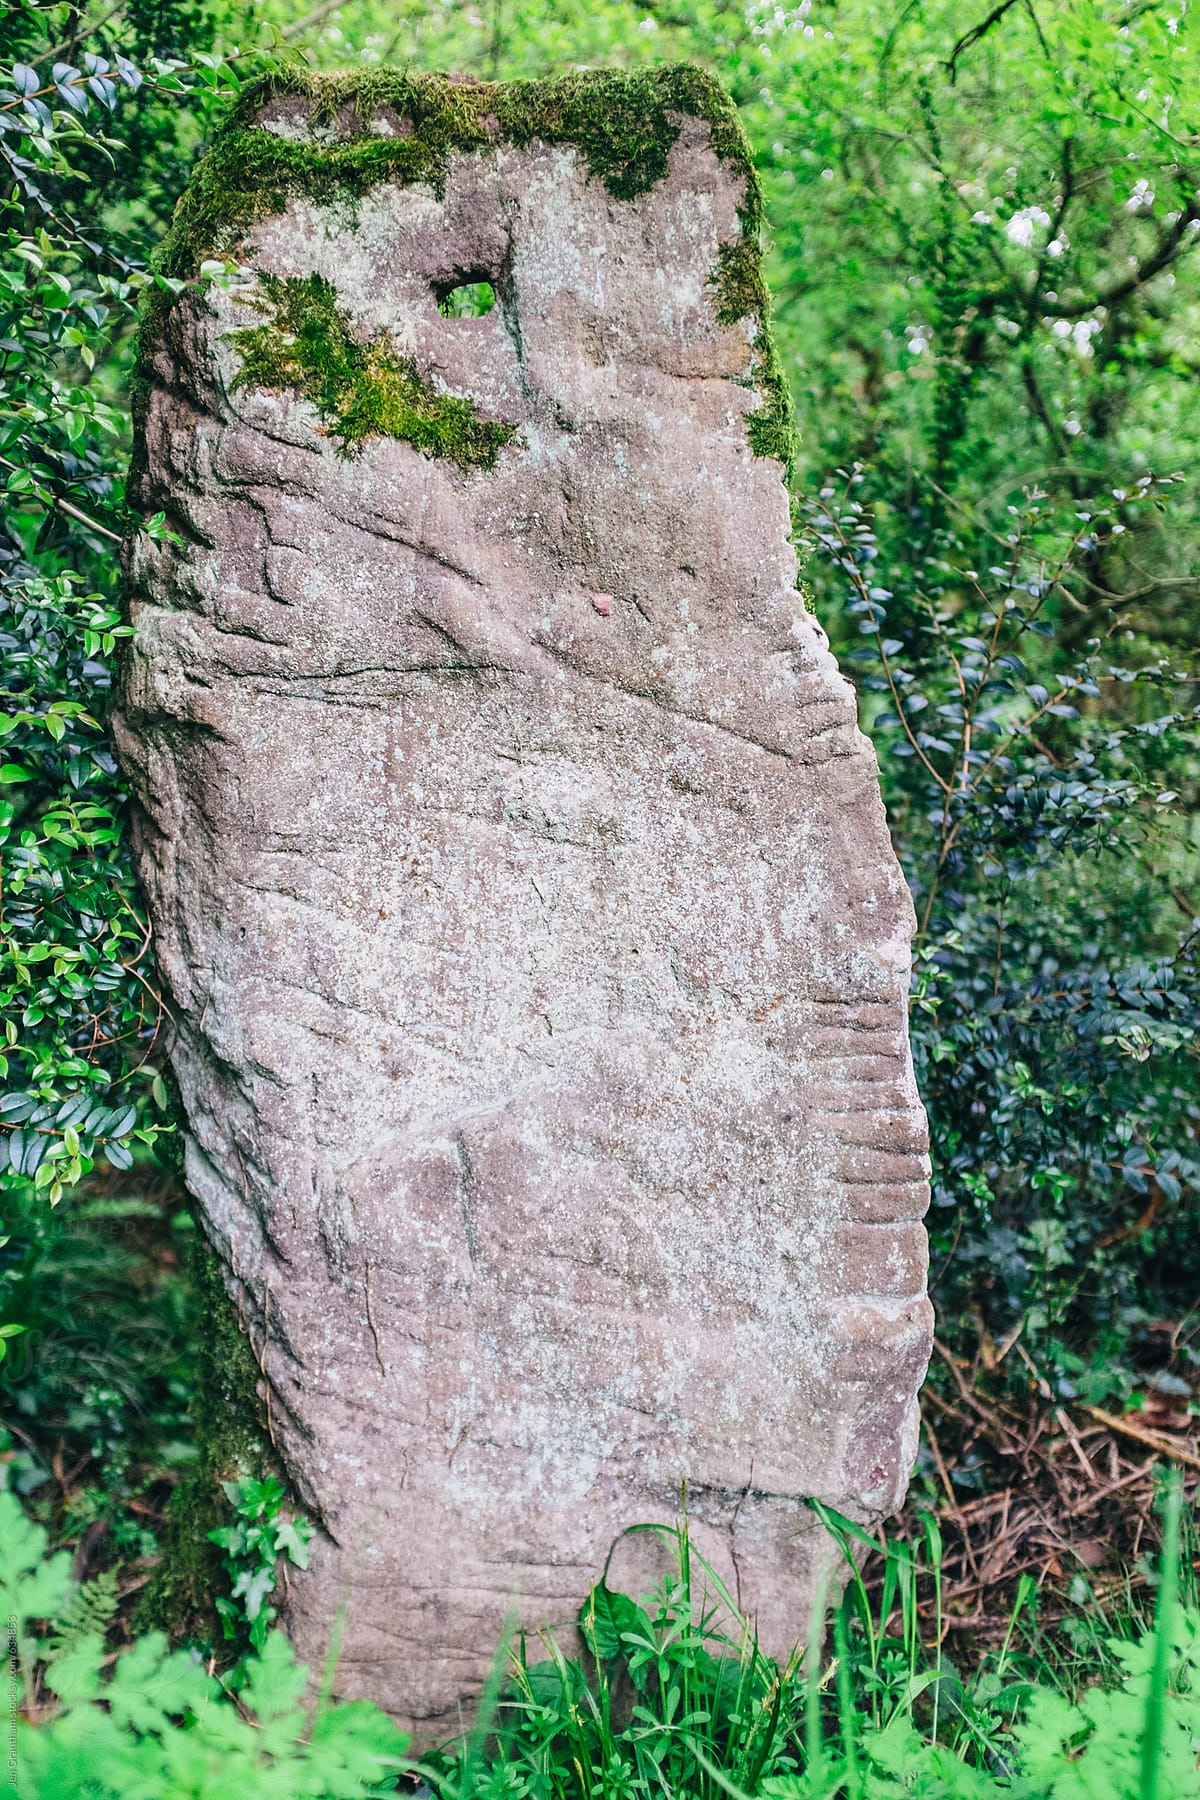 Standing stone in the forest